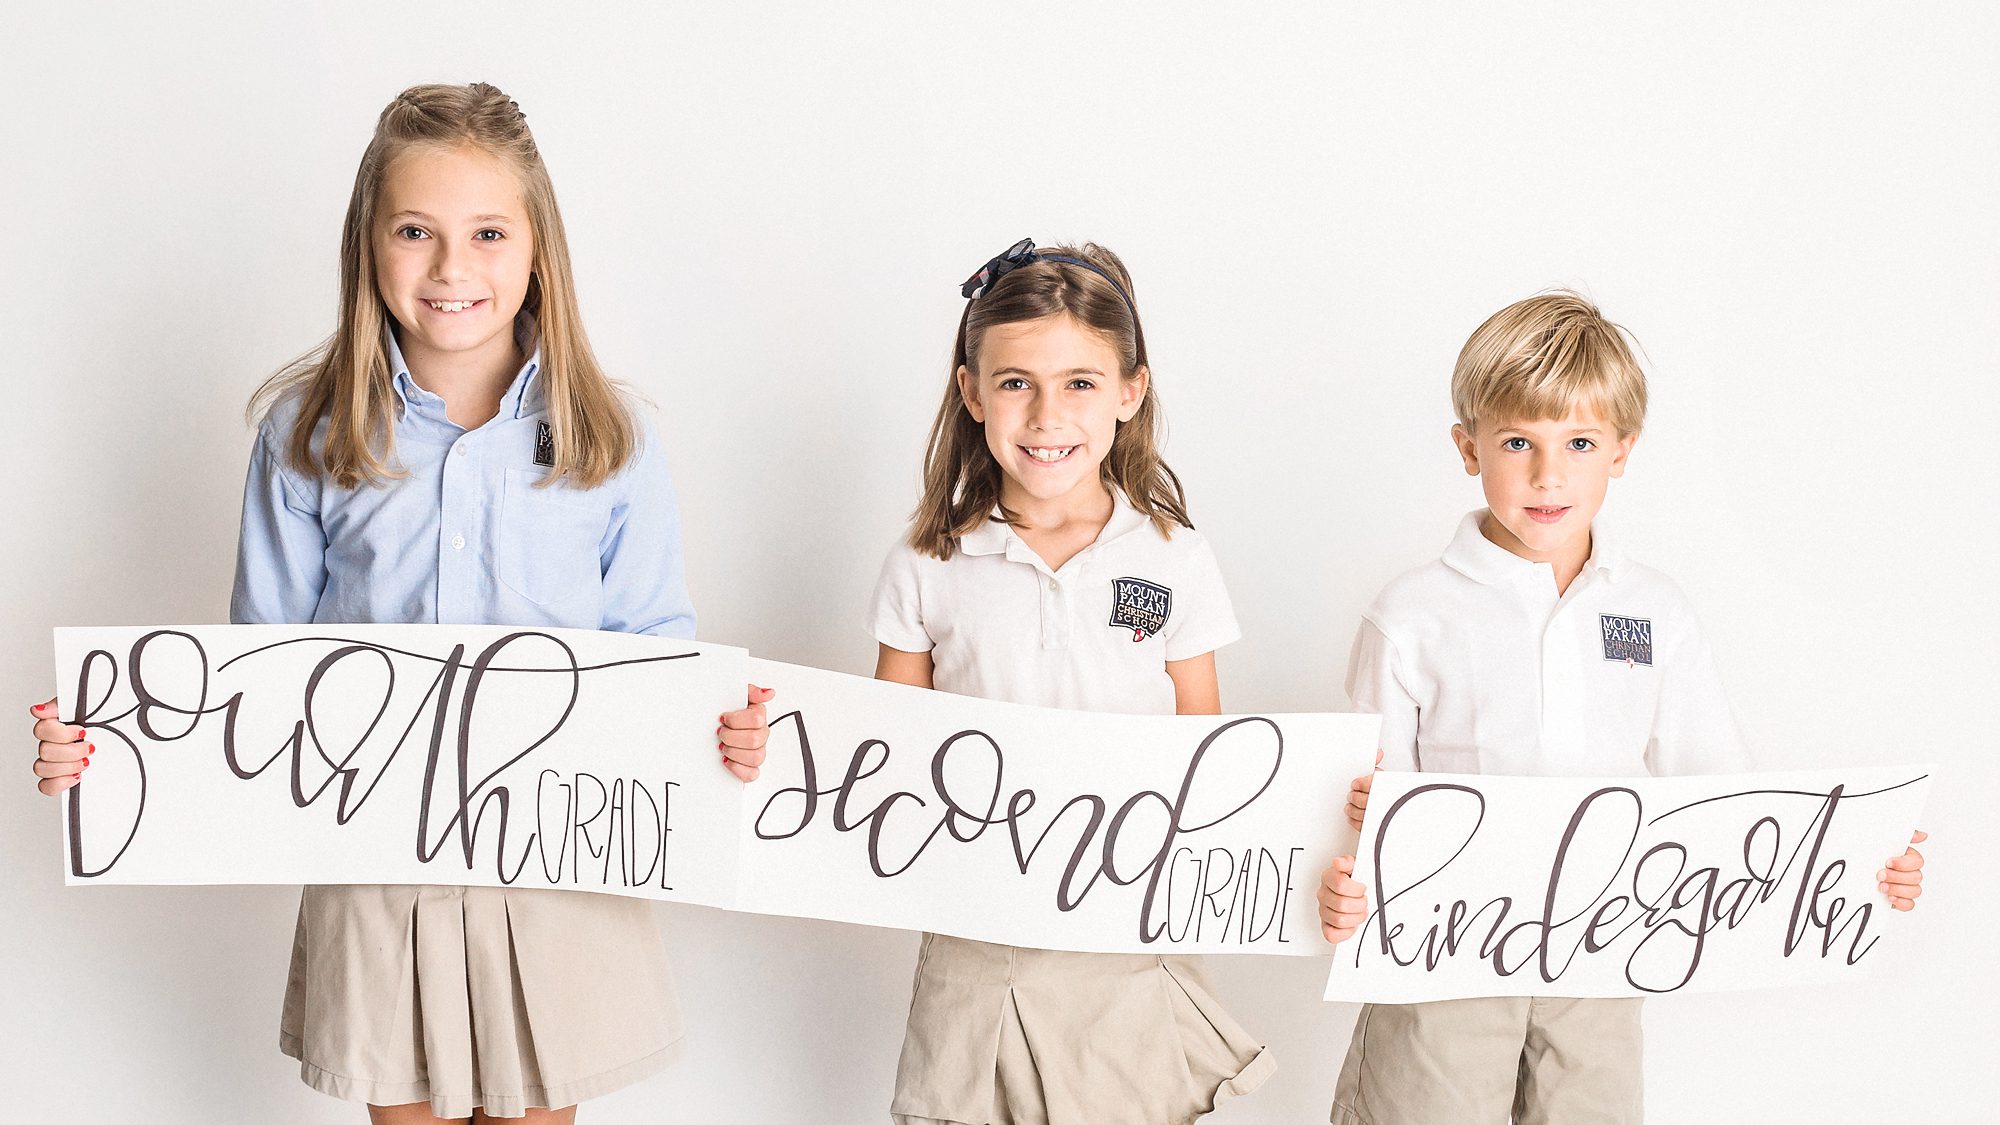 atlanta photographer - siblings first day of school 